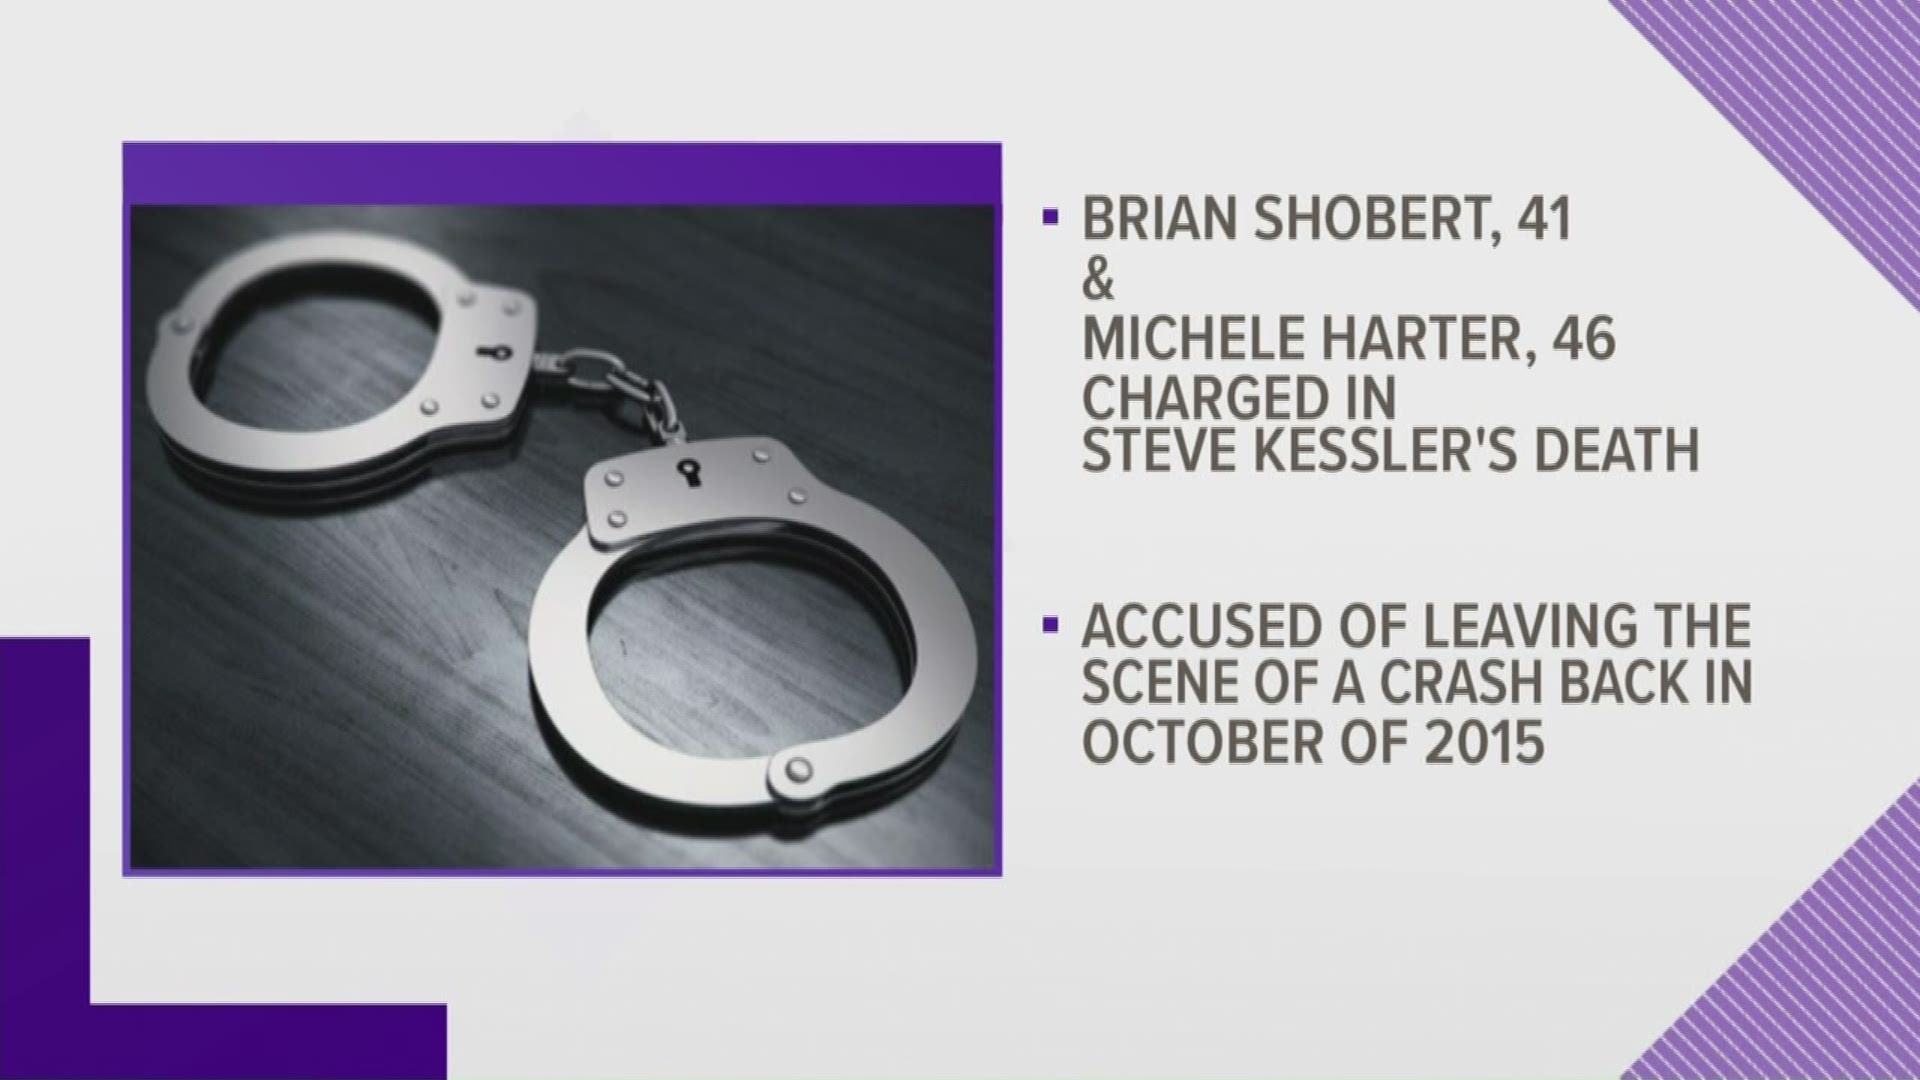 BRIAN SHOBERT AND MICHELE HARTER ARE ACCUSED OF LEAVING THE SCENE OF A SINGLE VEHICLE CRASH IN THE TOWN OF HUMPHREY.